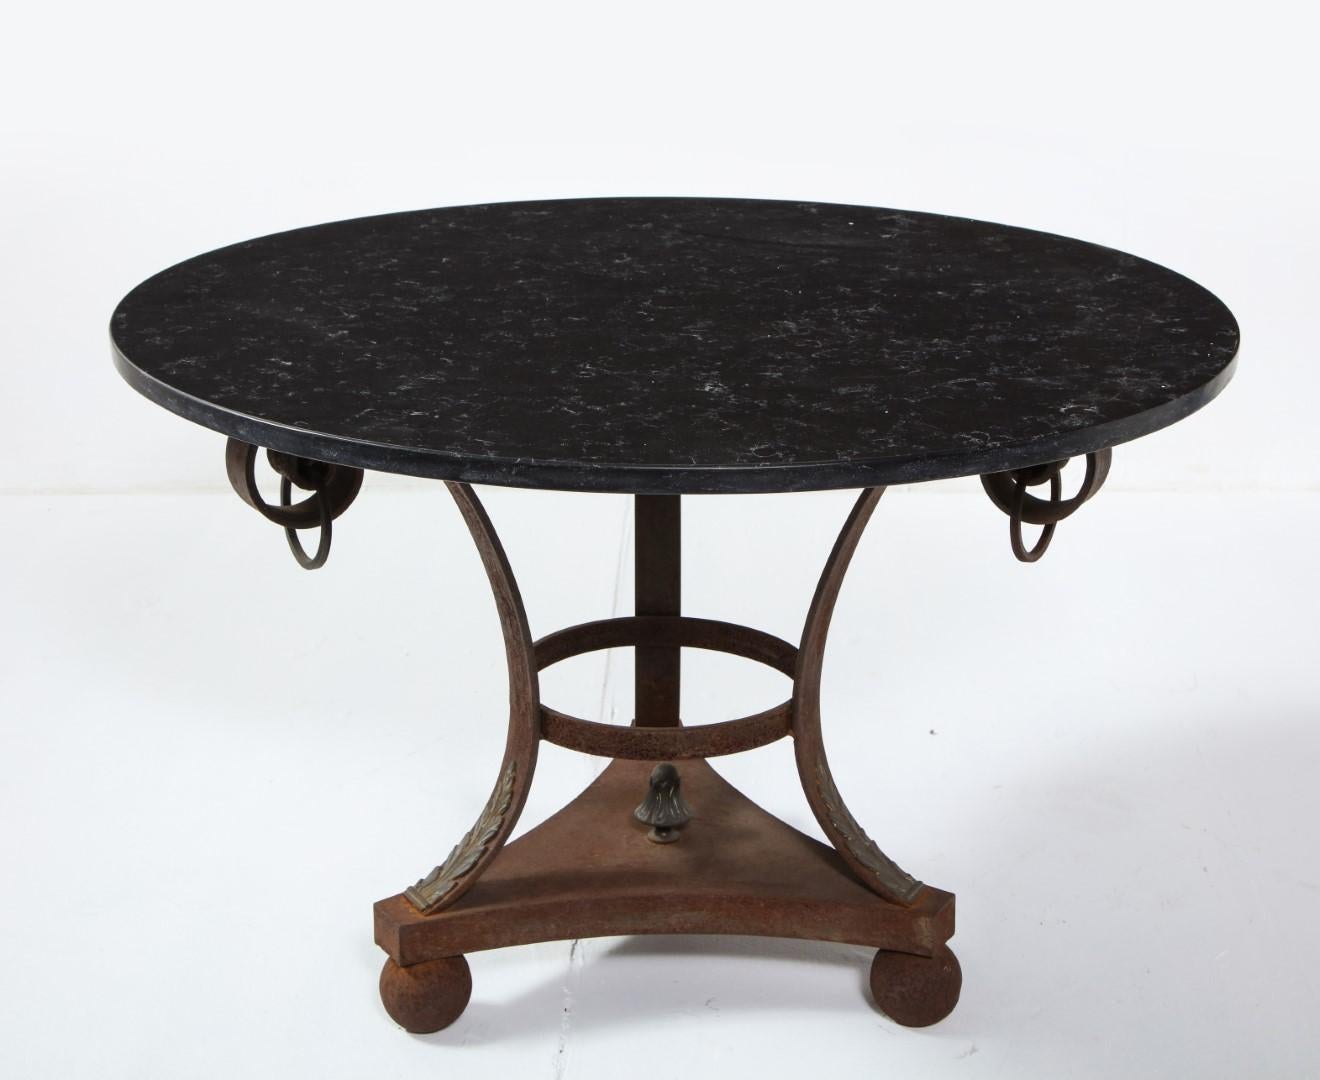 Vintage Italian Empire Style Wrought Iron Coffee Table with Black Marble Top 4